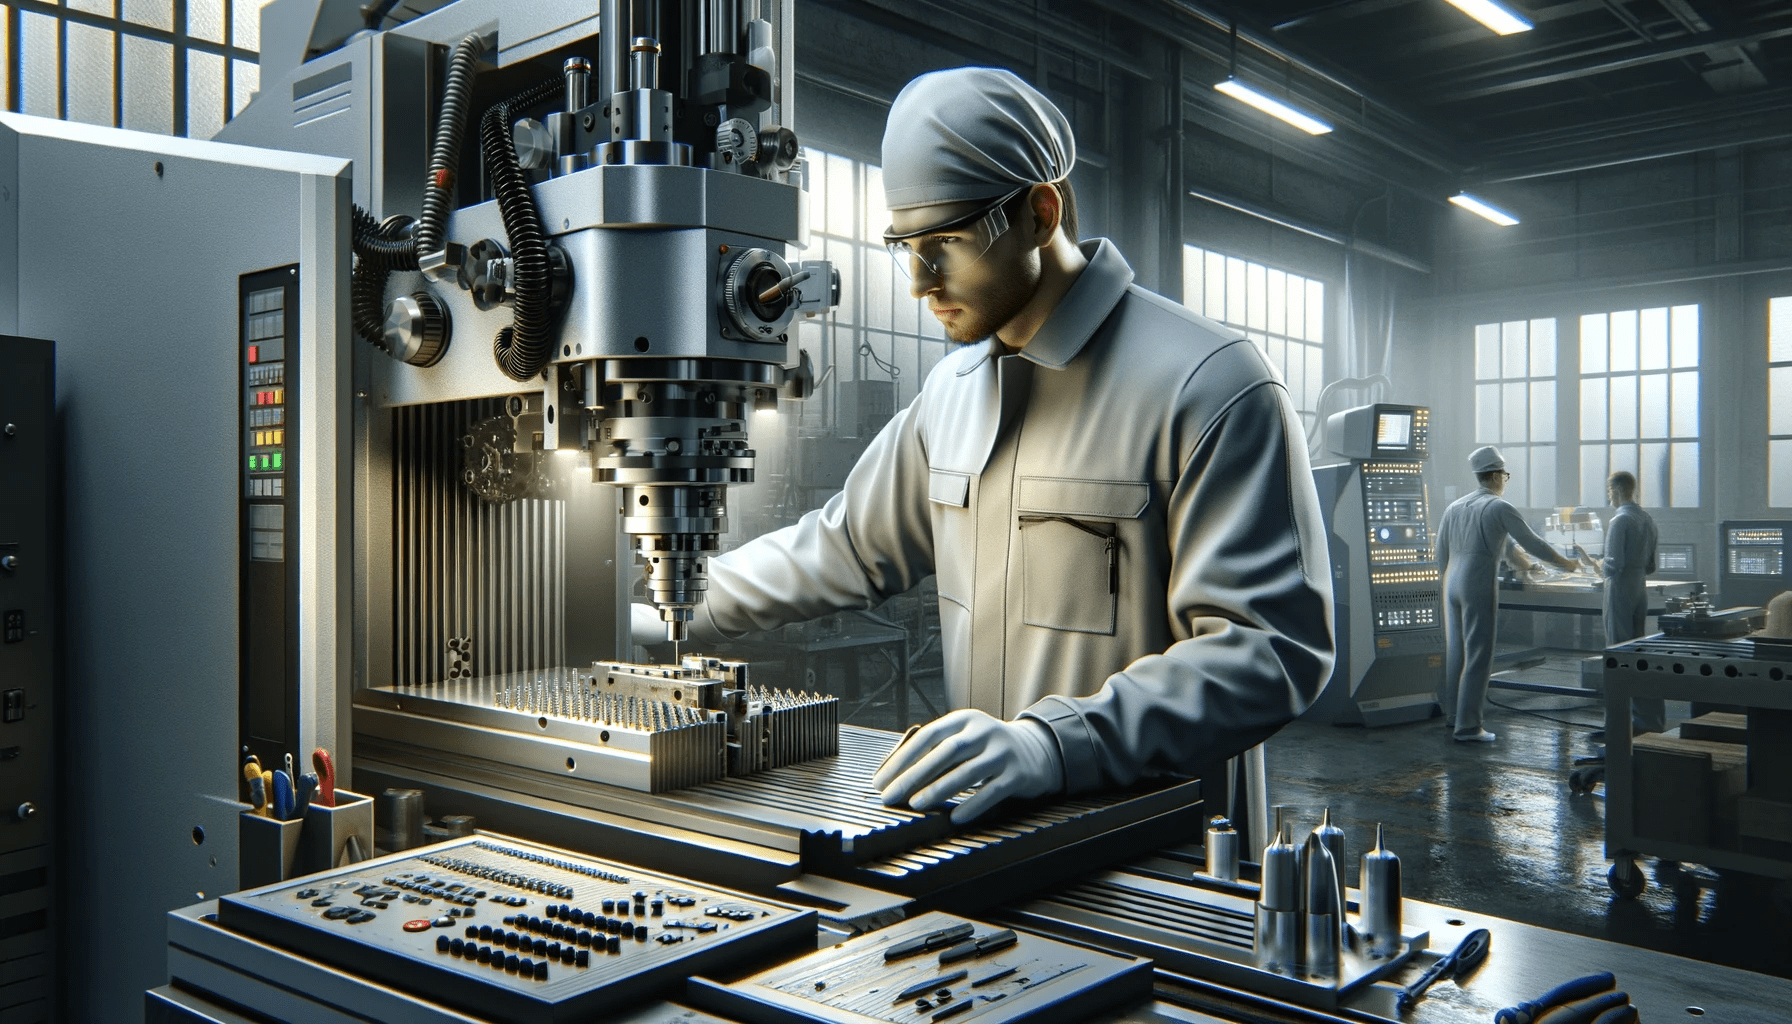 CNC machinist in a CNC workshop environment. The machinist, wearing protective gear, is intently operating a CNC machine. The (2)